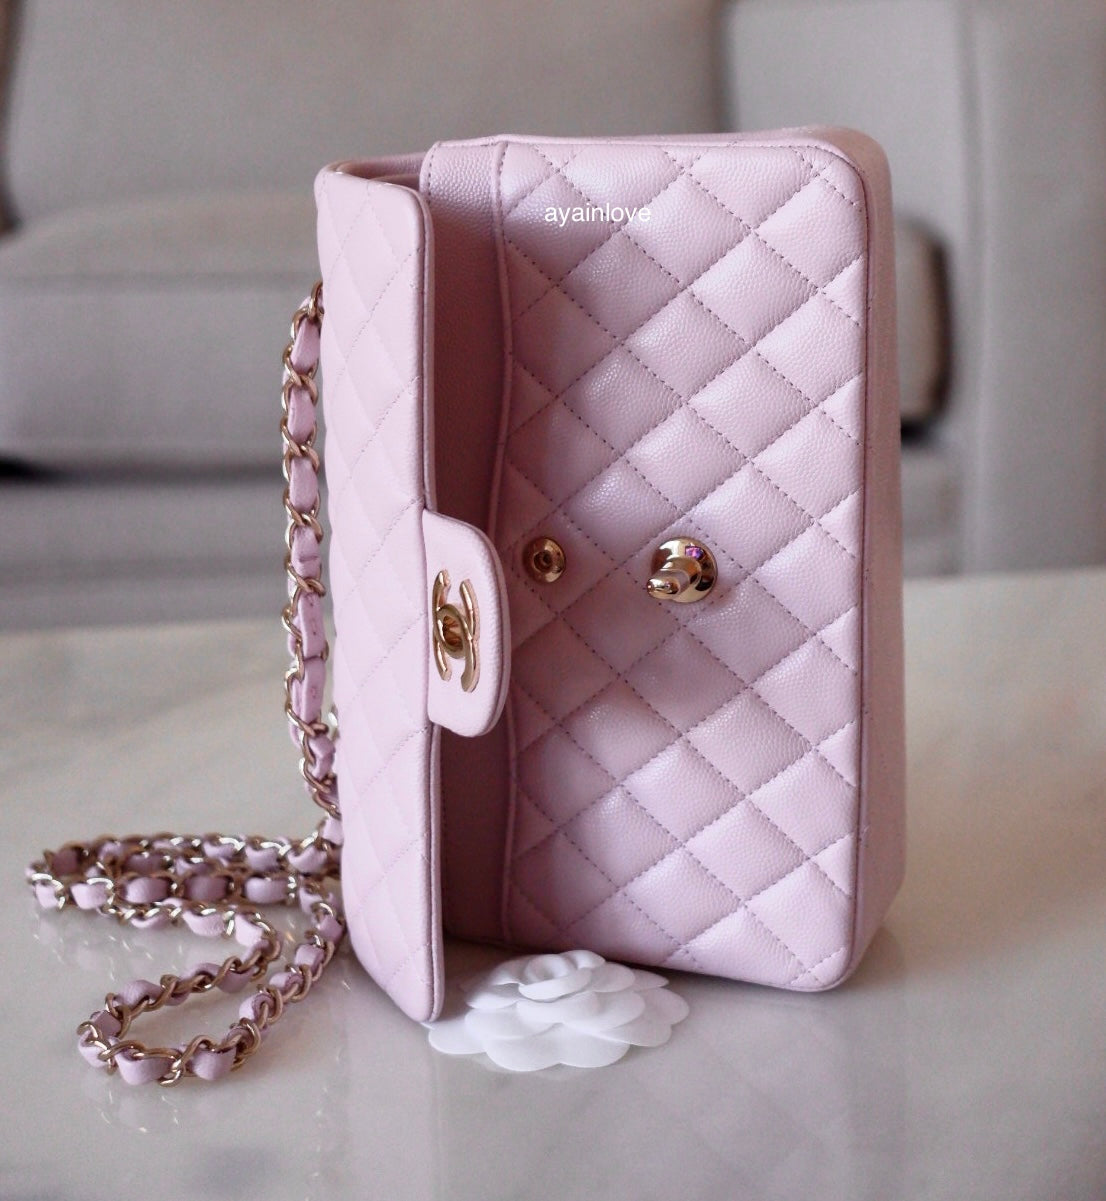 *NEW* Chanel 21S Classic Pearl Light Pink Small Wallet On Chain Crossbody  Bag